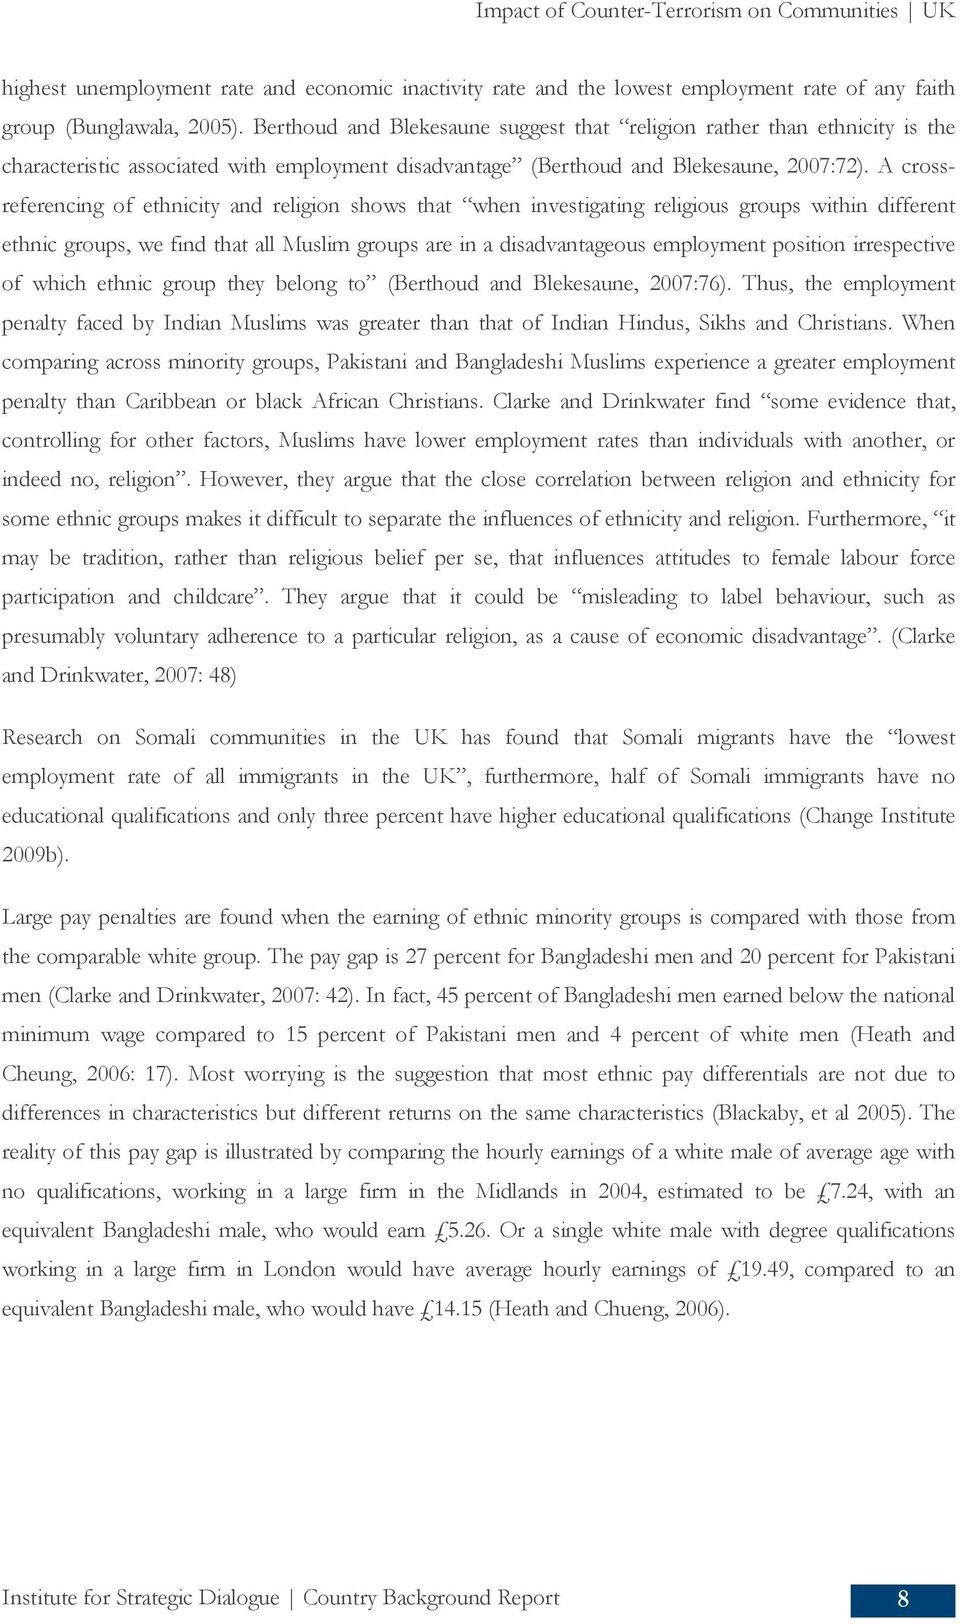 A crossreferencing of ethnicity and religion shows that when investigating religious groups within different ethnic groups, we find that all Muslim groups are in a disadvantageous employment position